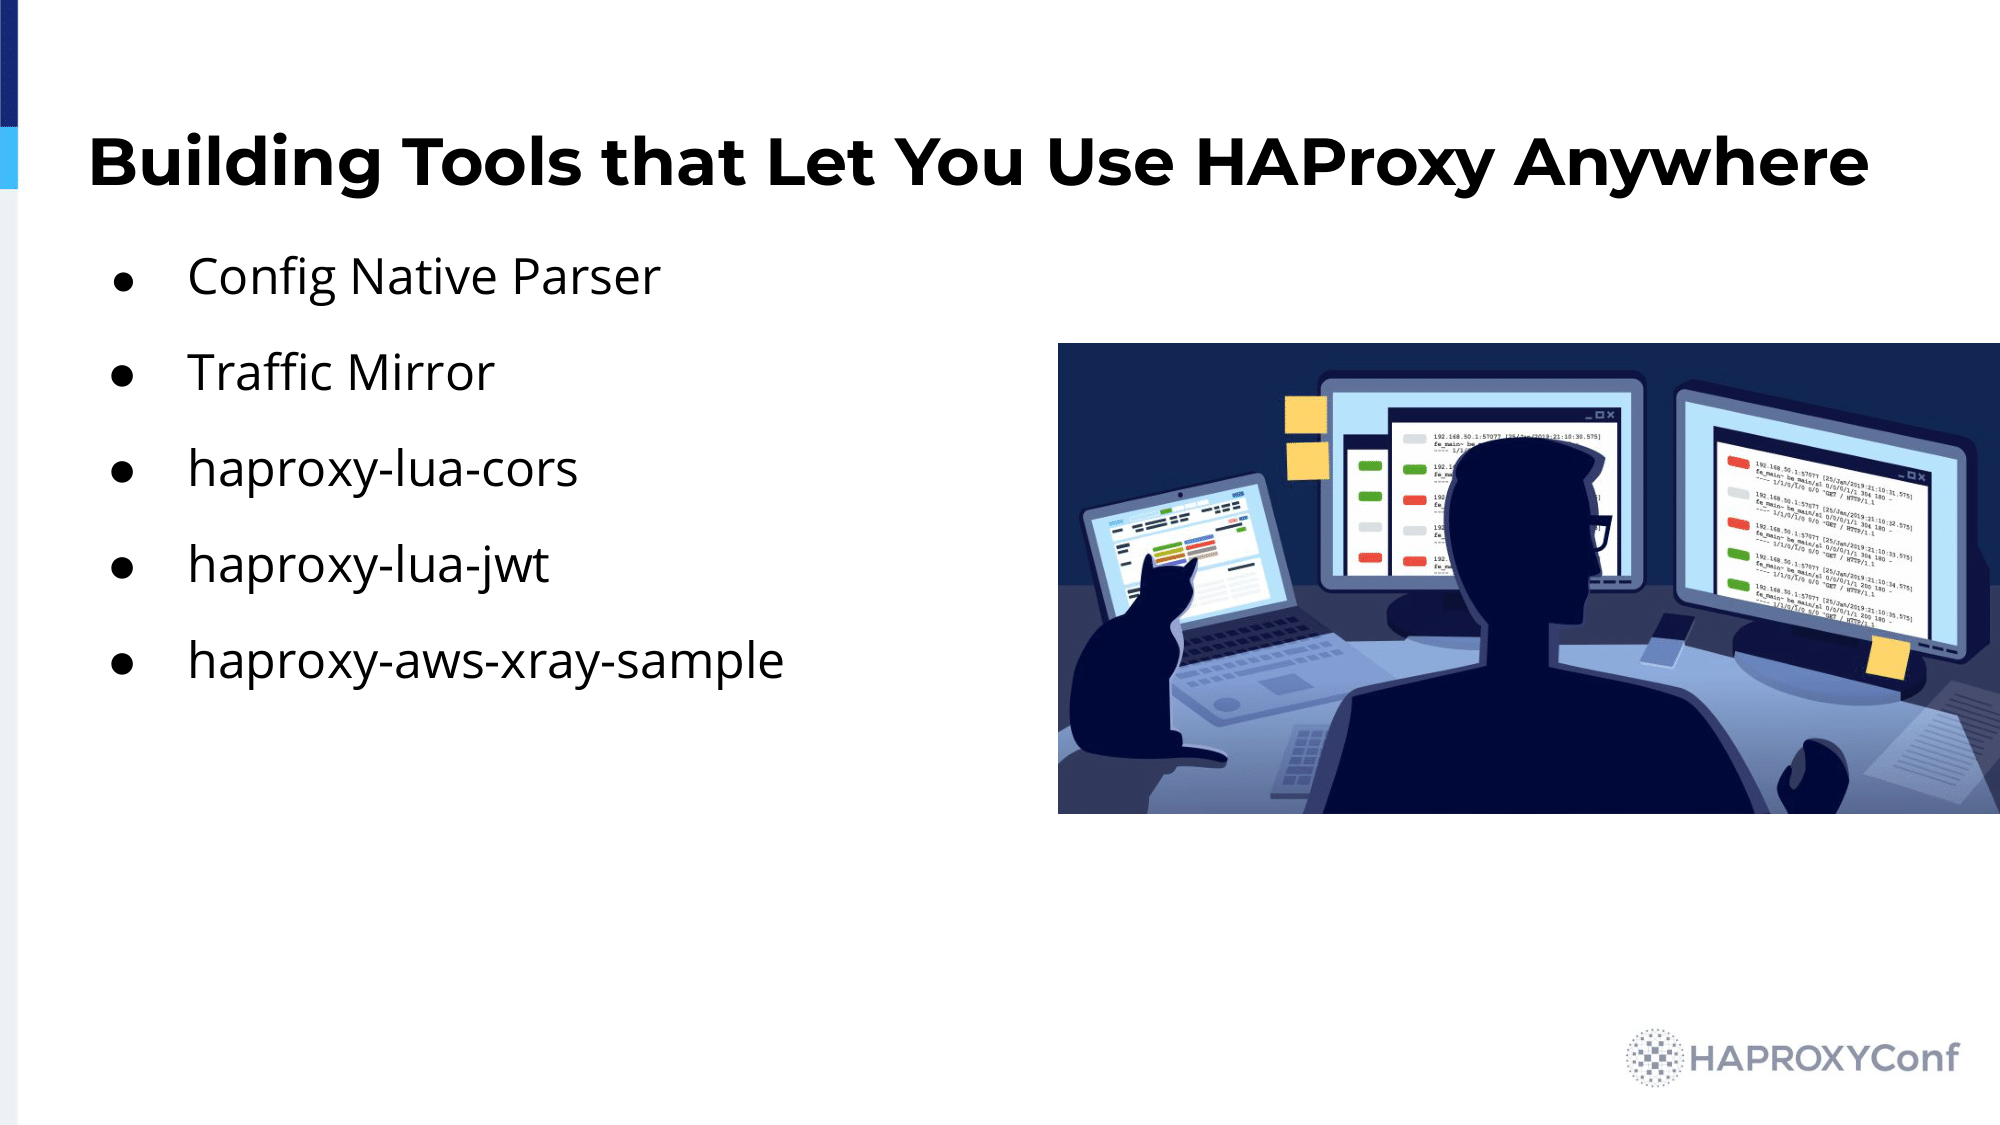 6.-building-tools-that-let-you-use-haproxy-anywhere